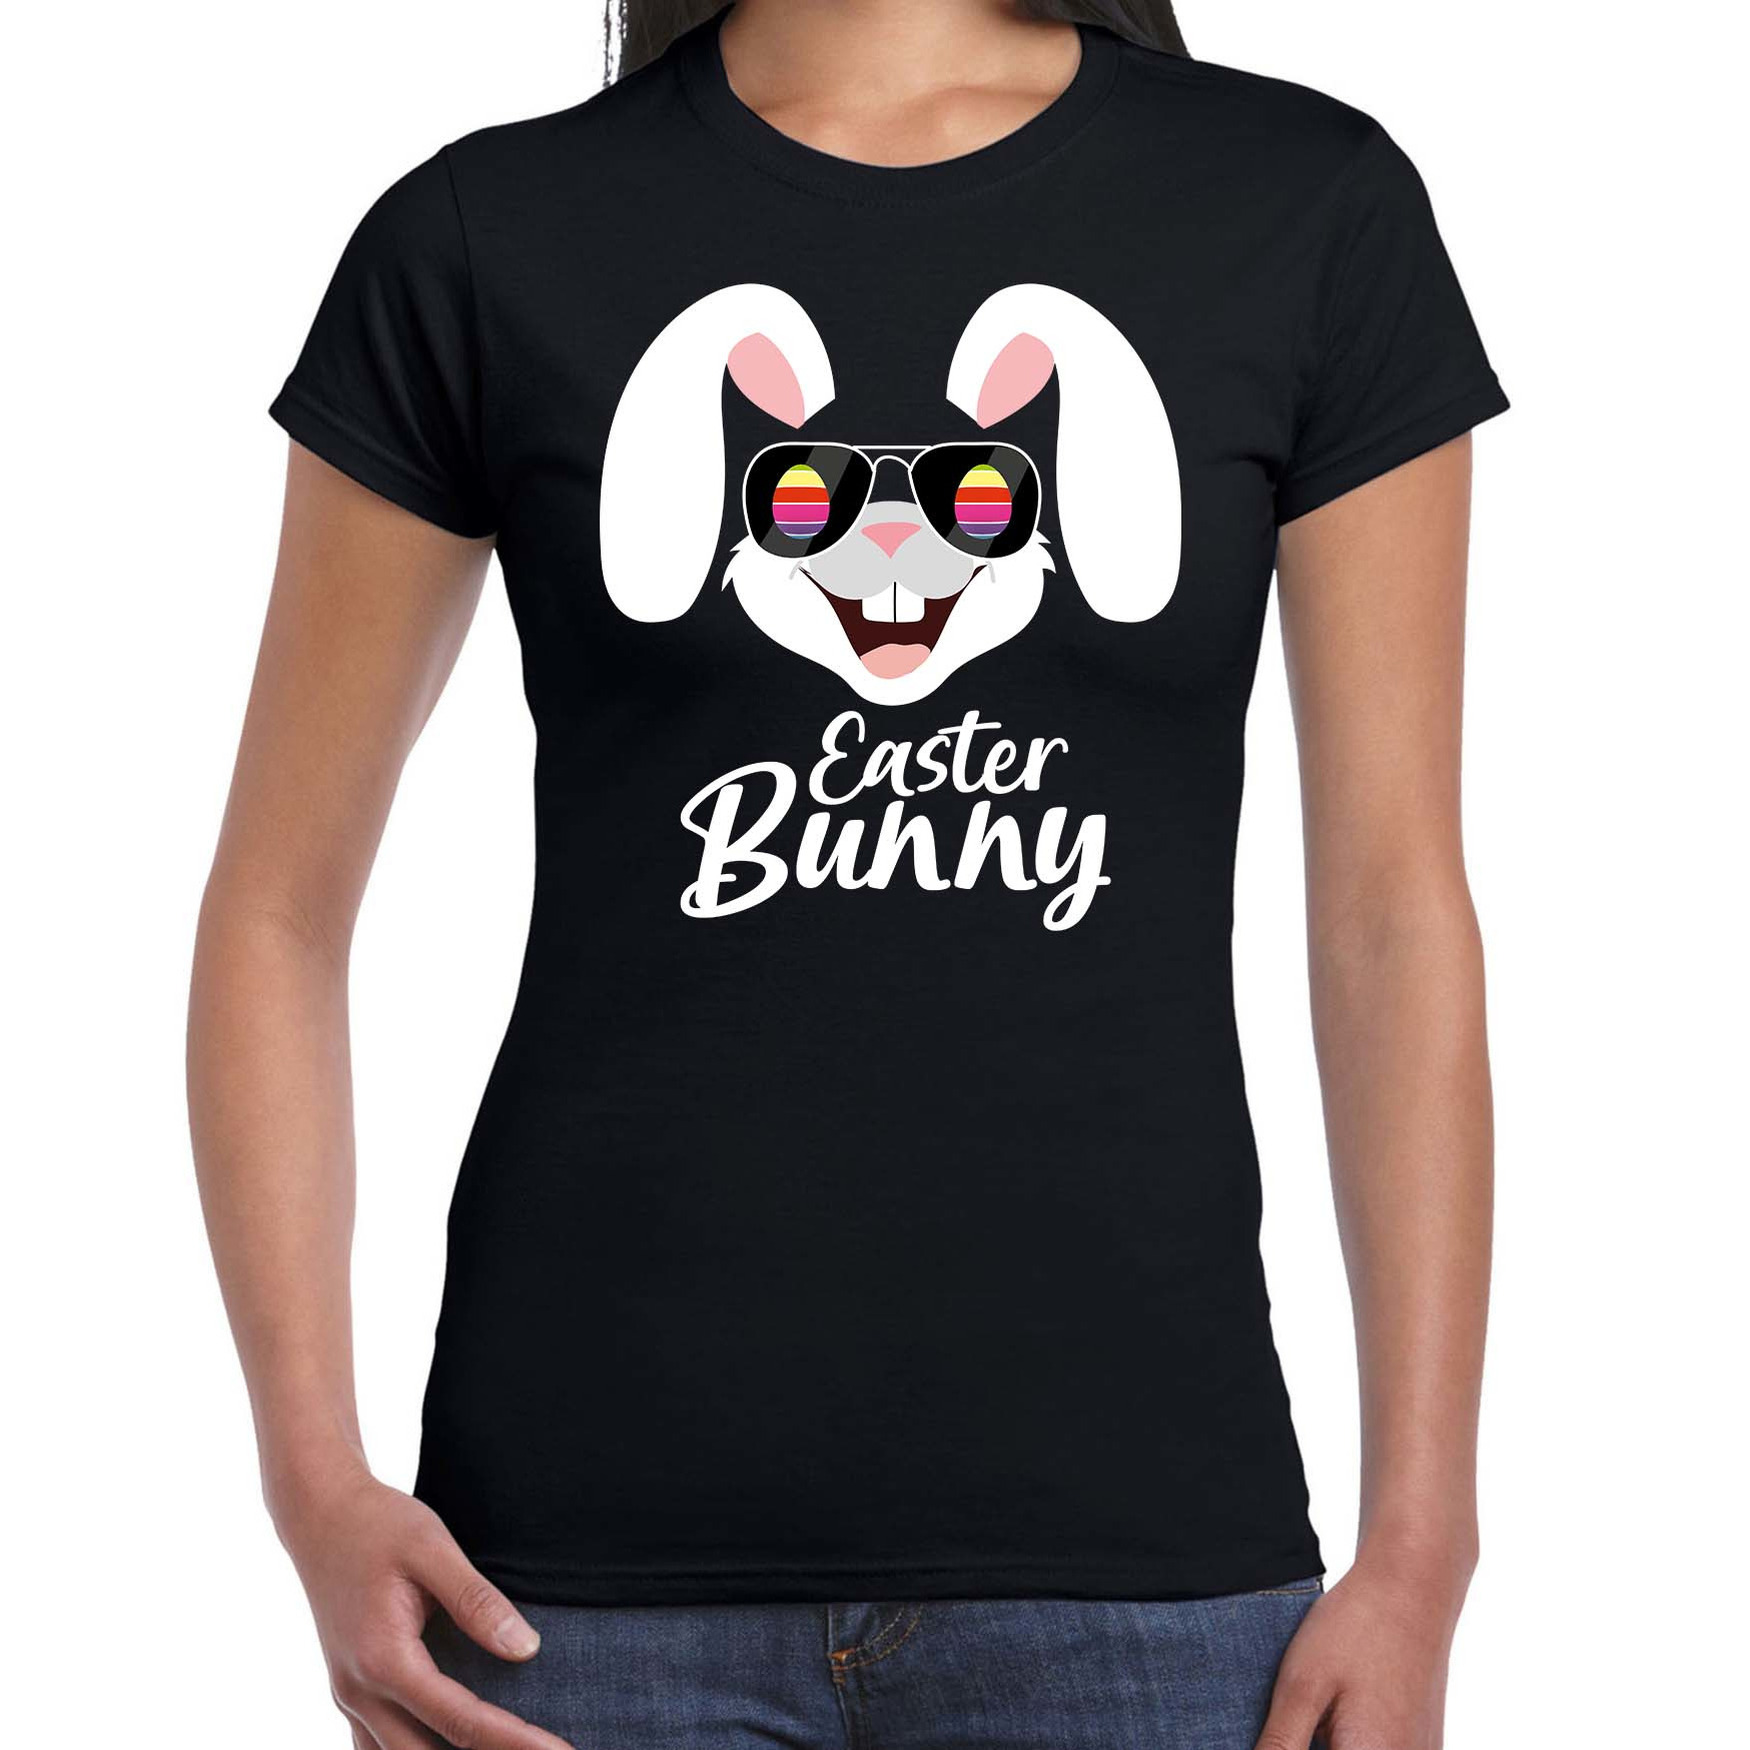 Easter bunny-Paashaas t-shirt zwart voor dames Foute kleding-outfit Pasen